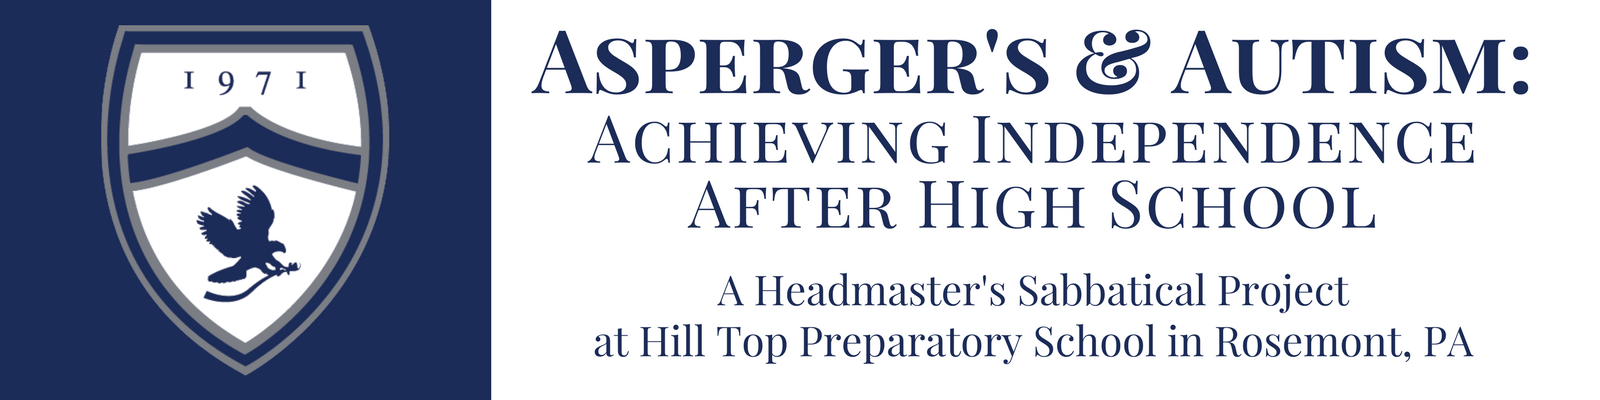 Asperger's and Autism:  Achieving Independence After High School